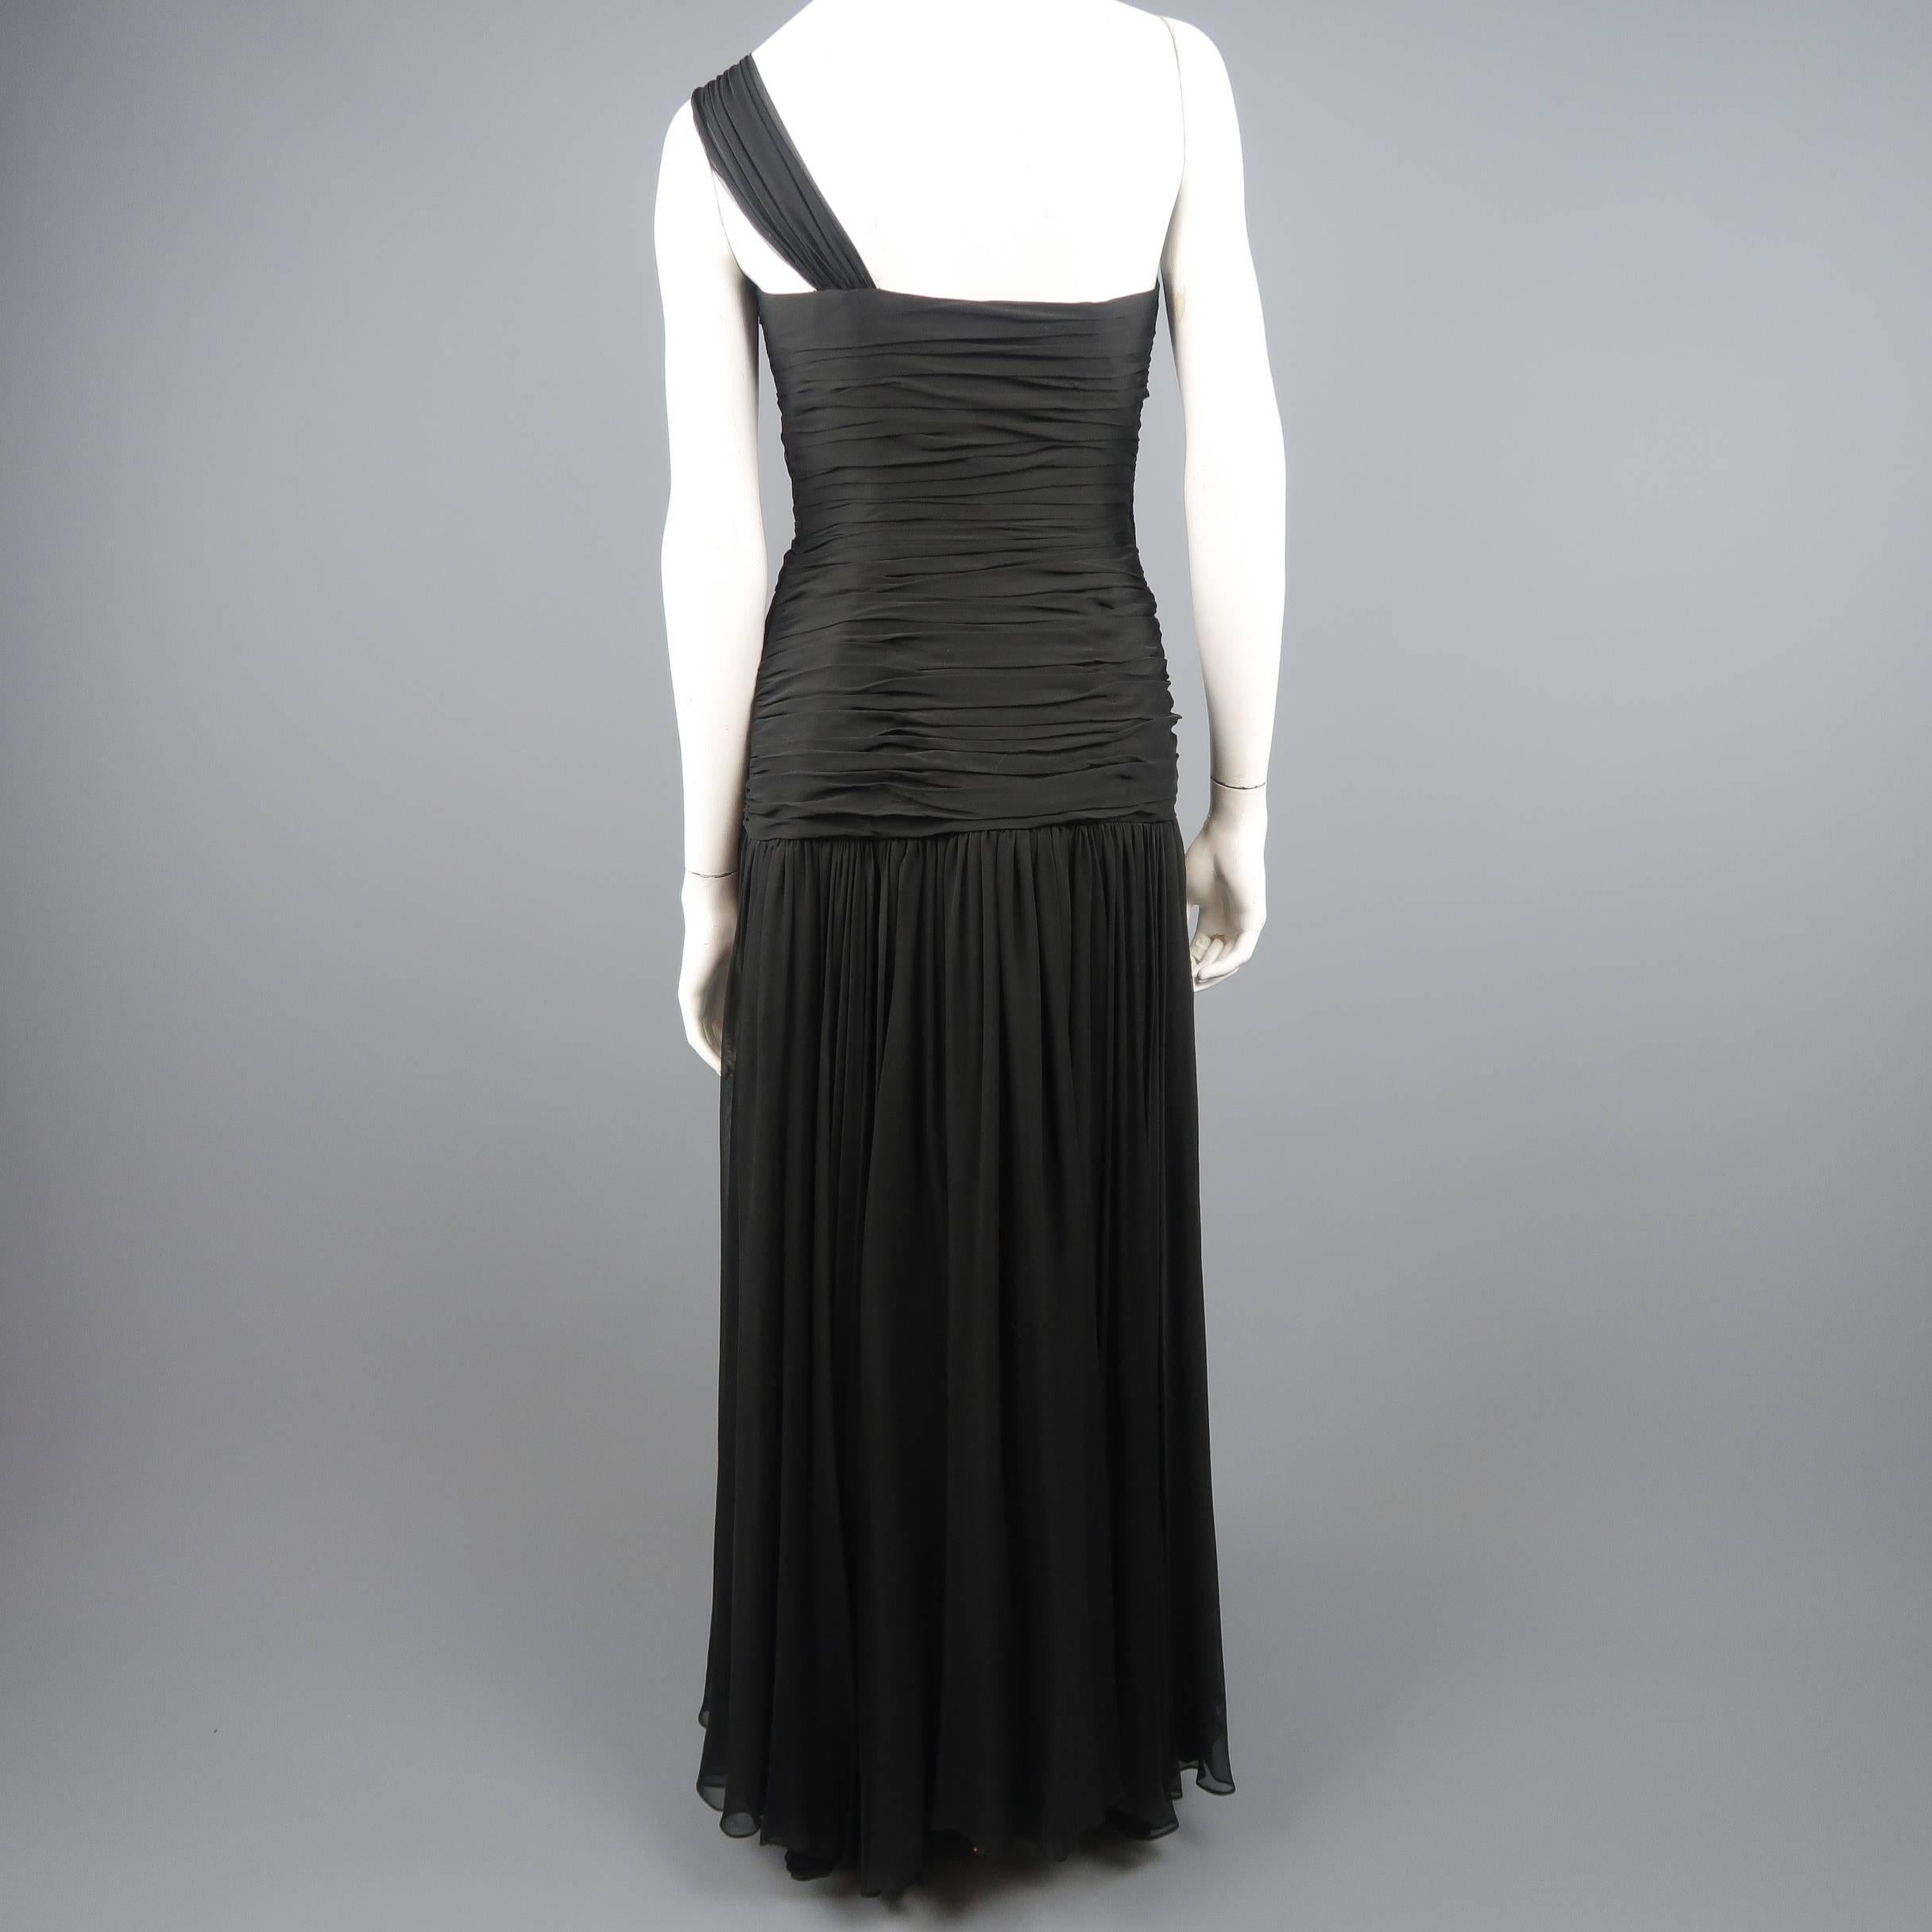 ADELE SIMPSON Size 8 Black Pleated Silk One Shoulder Sweetheart Cocktail Dress 3